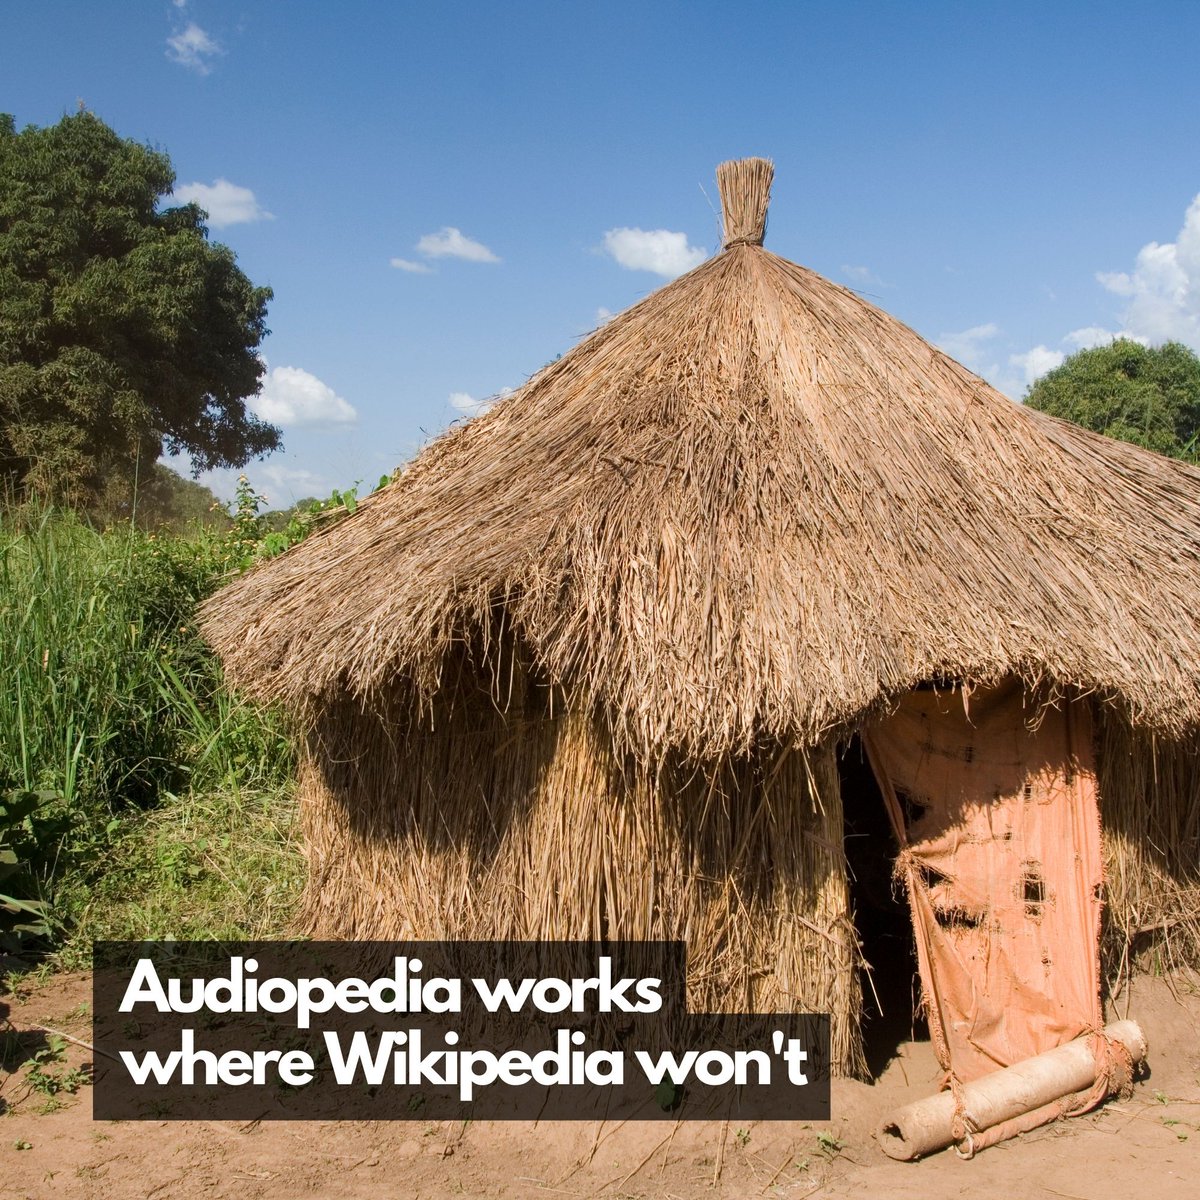 Where the digital divide silences progress, #Audiopedia speaks volumes. Offline, off-grid, or non-literate—no barrier stops the flow of knowledge. Let's support learning everywhere. 🌿📖 #WikiCantButWeCan #LearnAnywhere